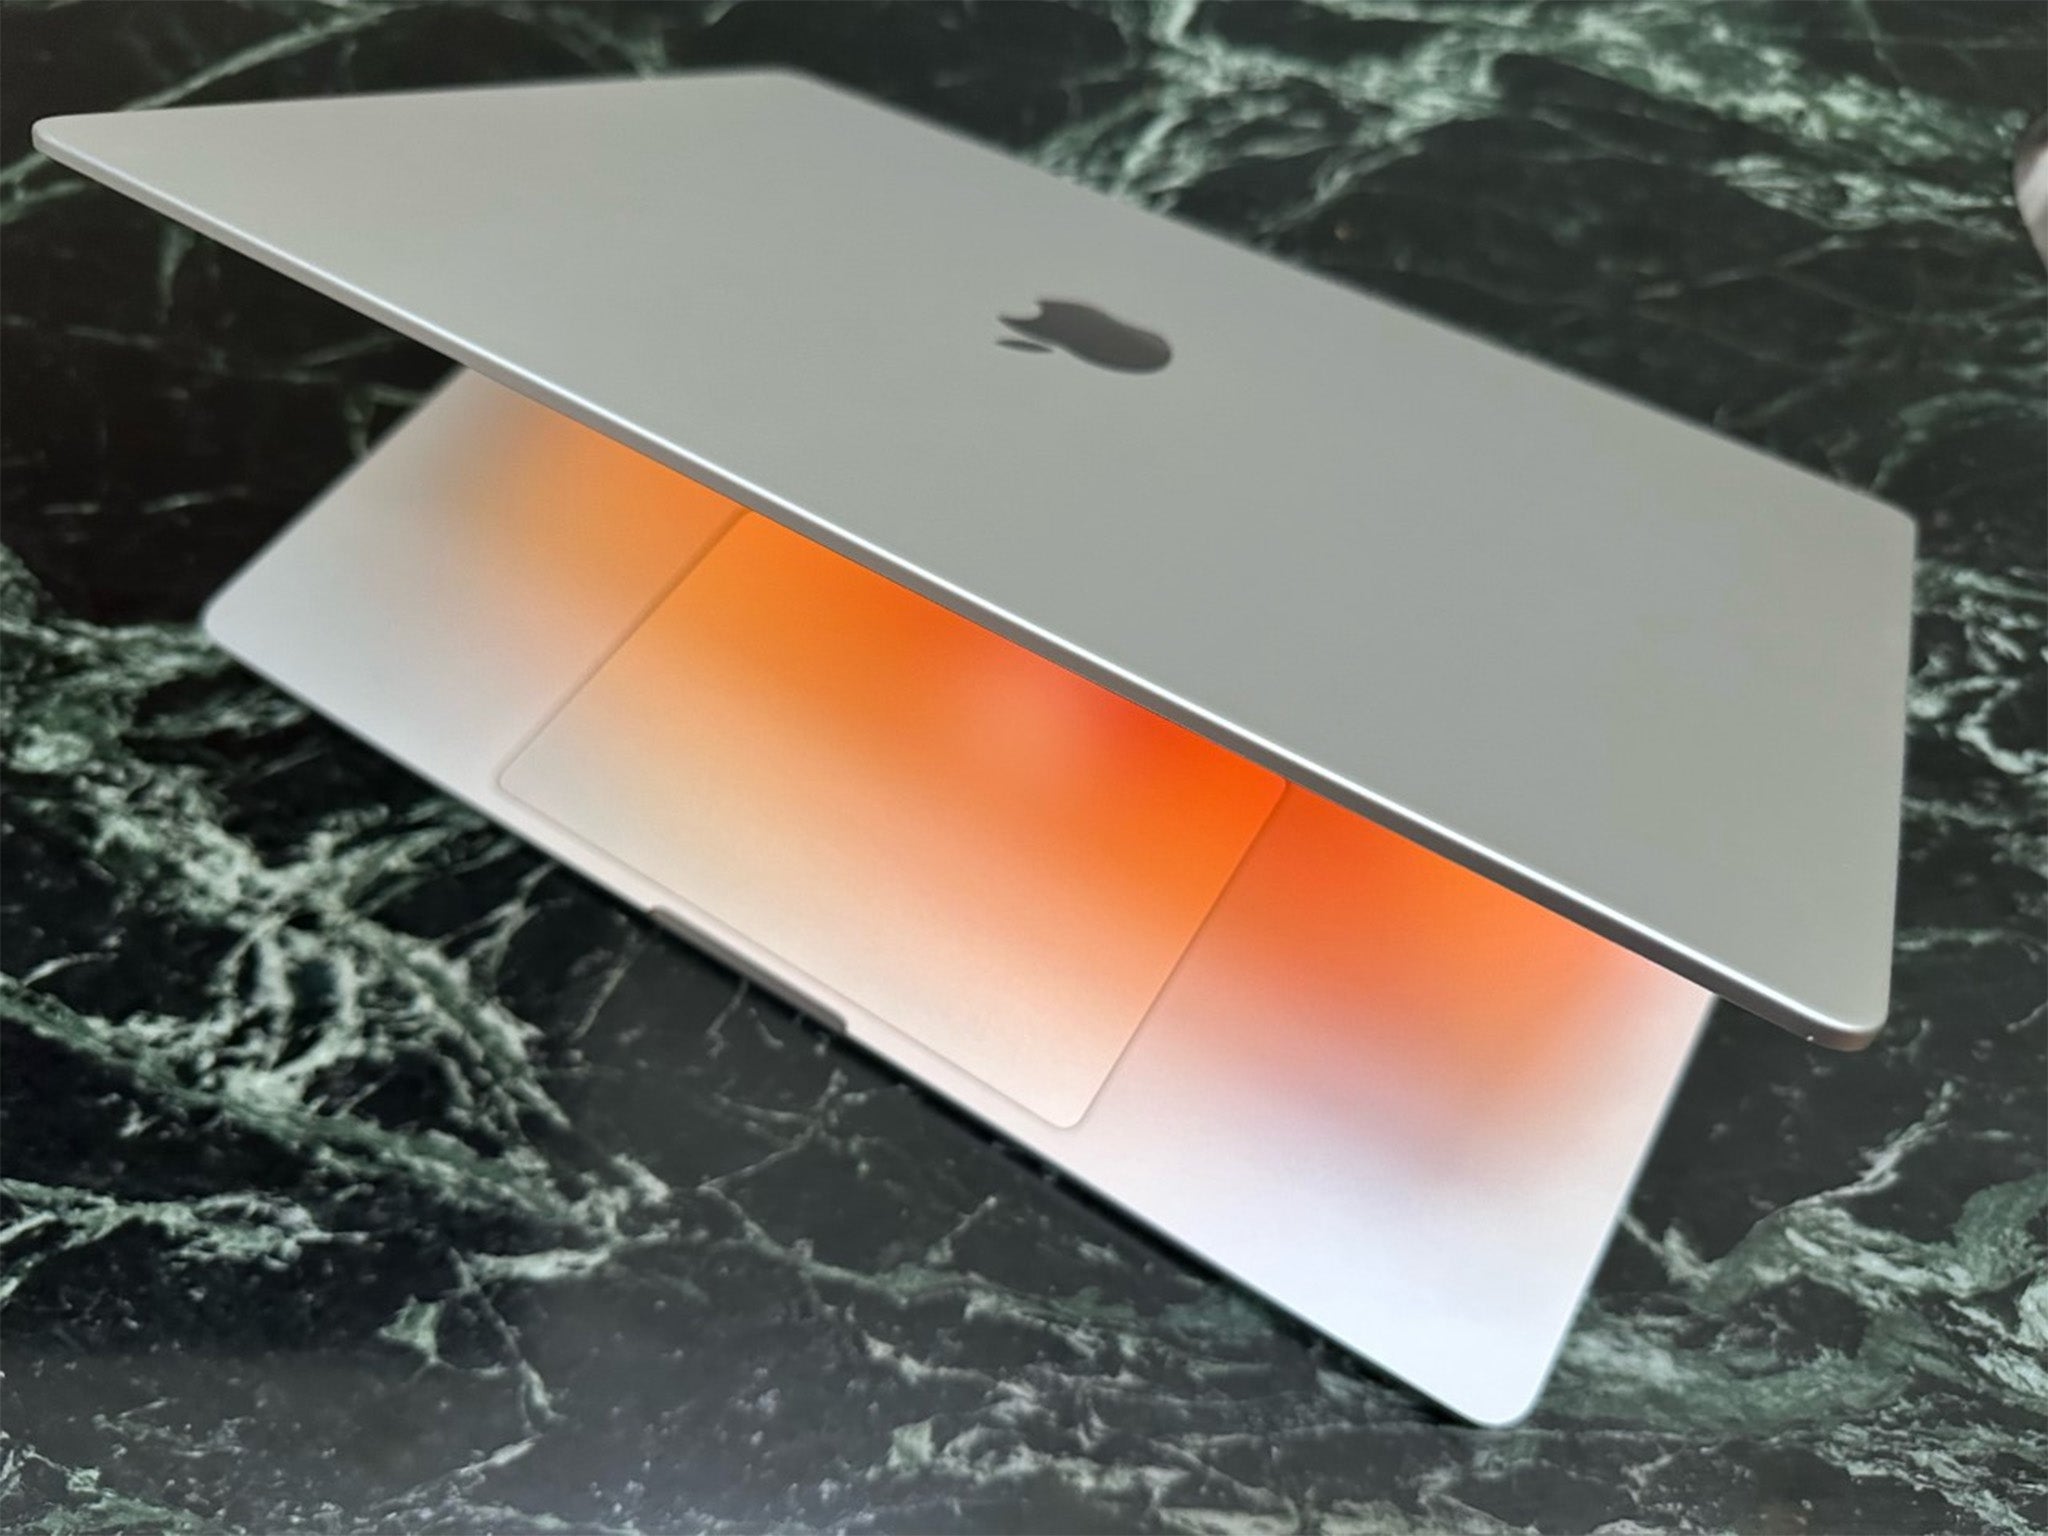 The design is indistinguishable from the MacBook pro M1 models launched in 2021